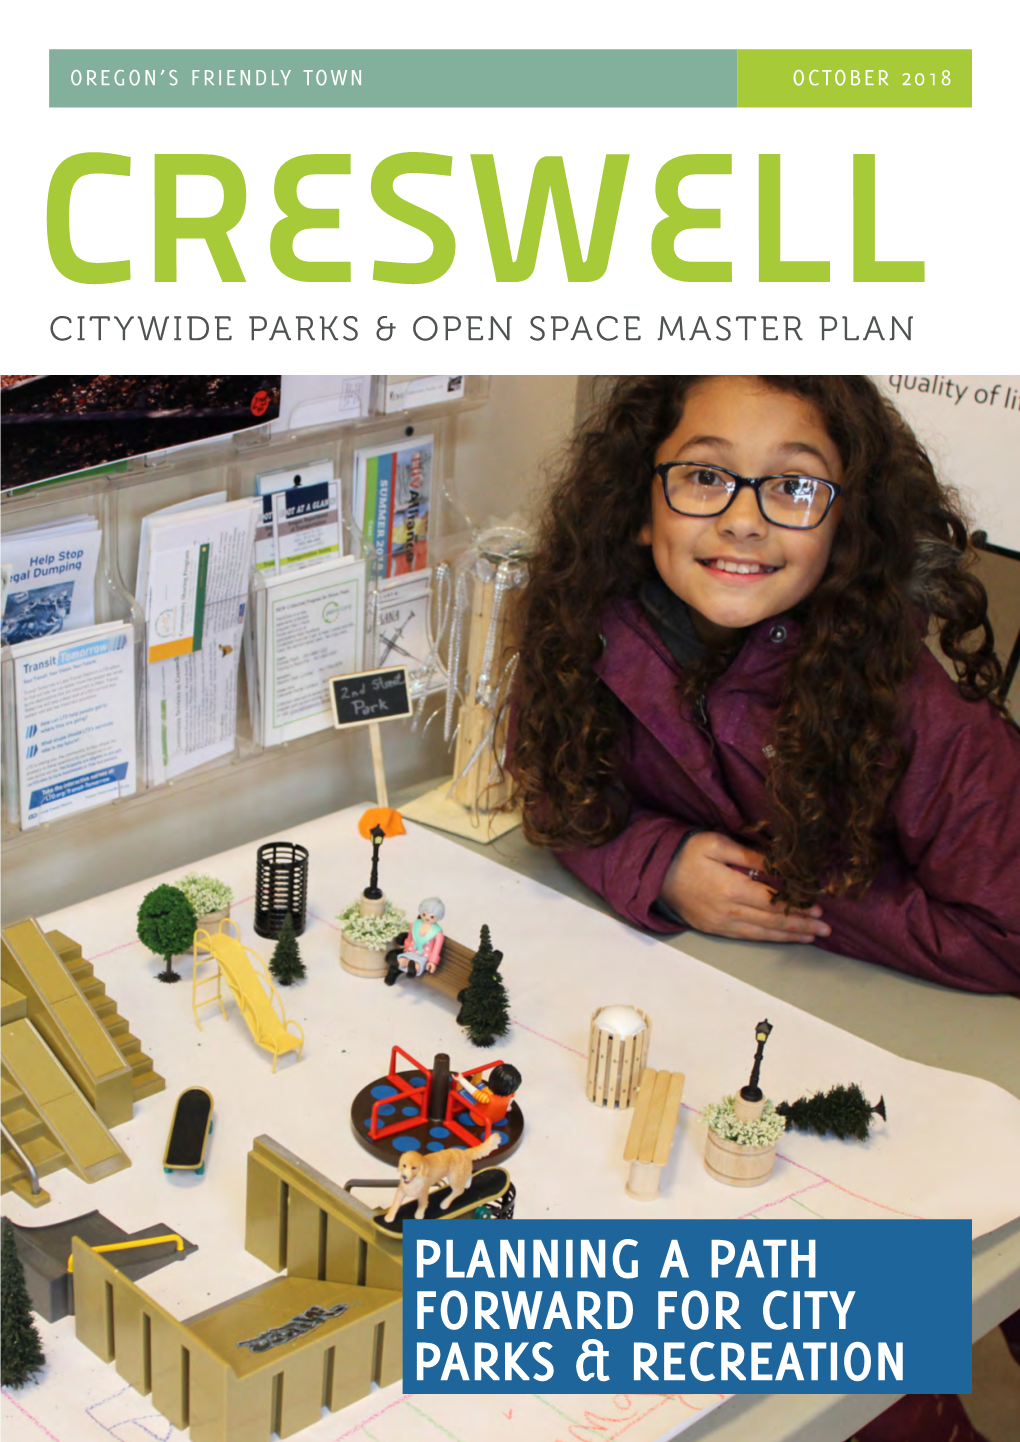 Creswell Parks & Open Space Master Plan